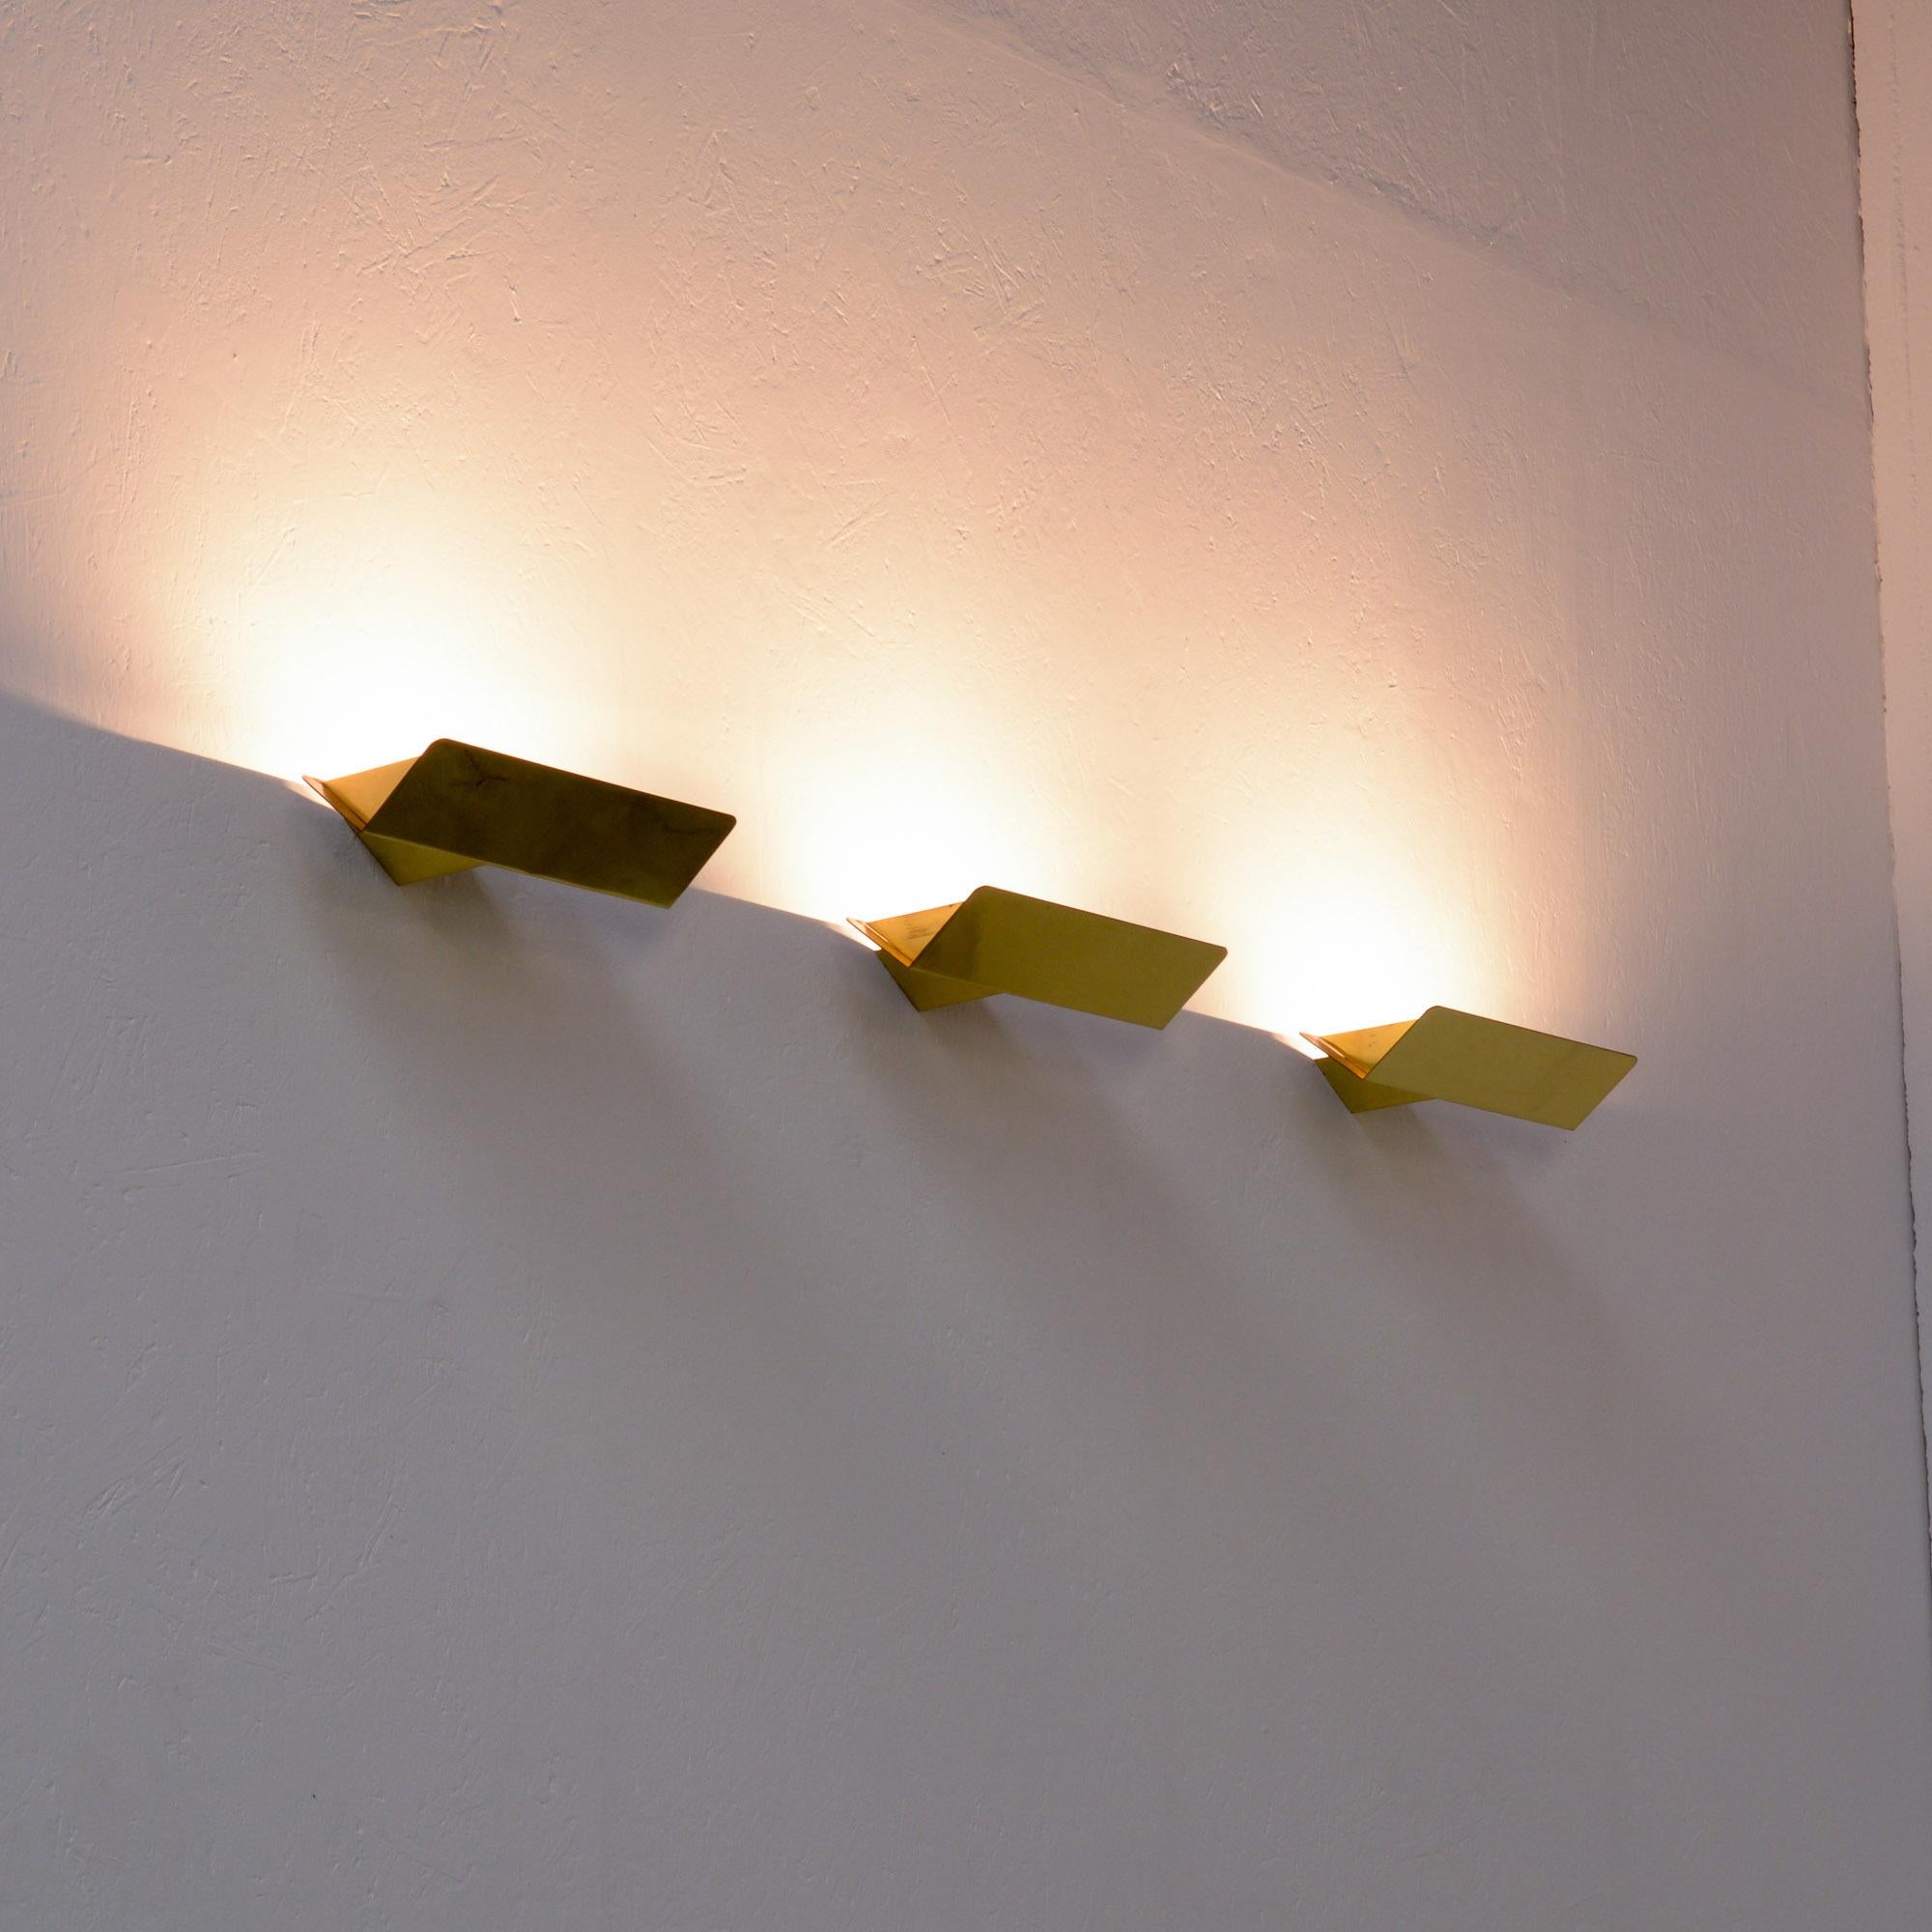 Minimalist Set of 3 Wall Lamps by Paul Gillis for Light